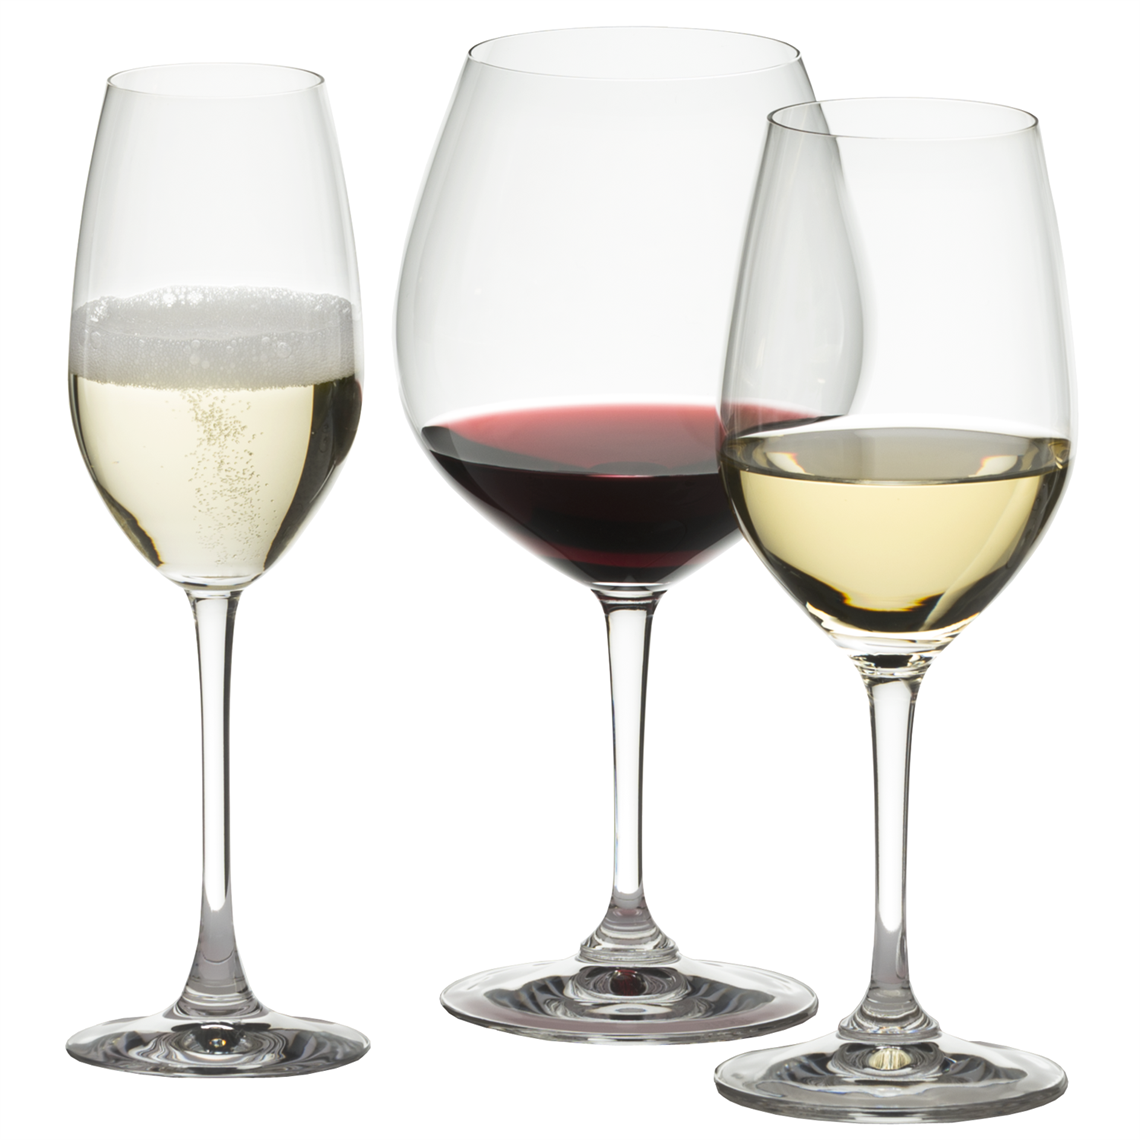 View more red wine glasses from our Restaurant & Trade Glasses range